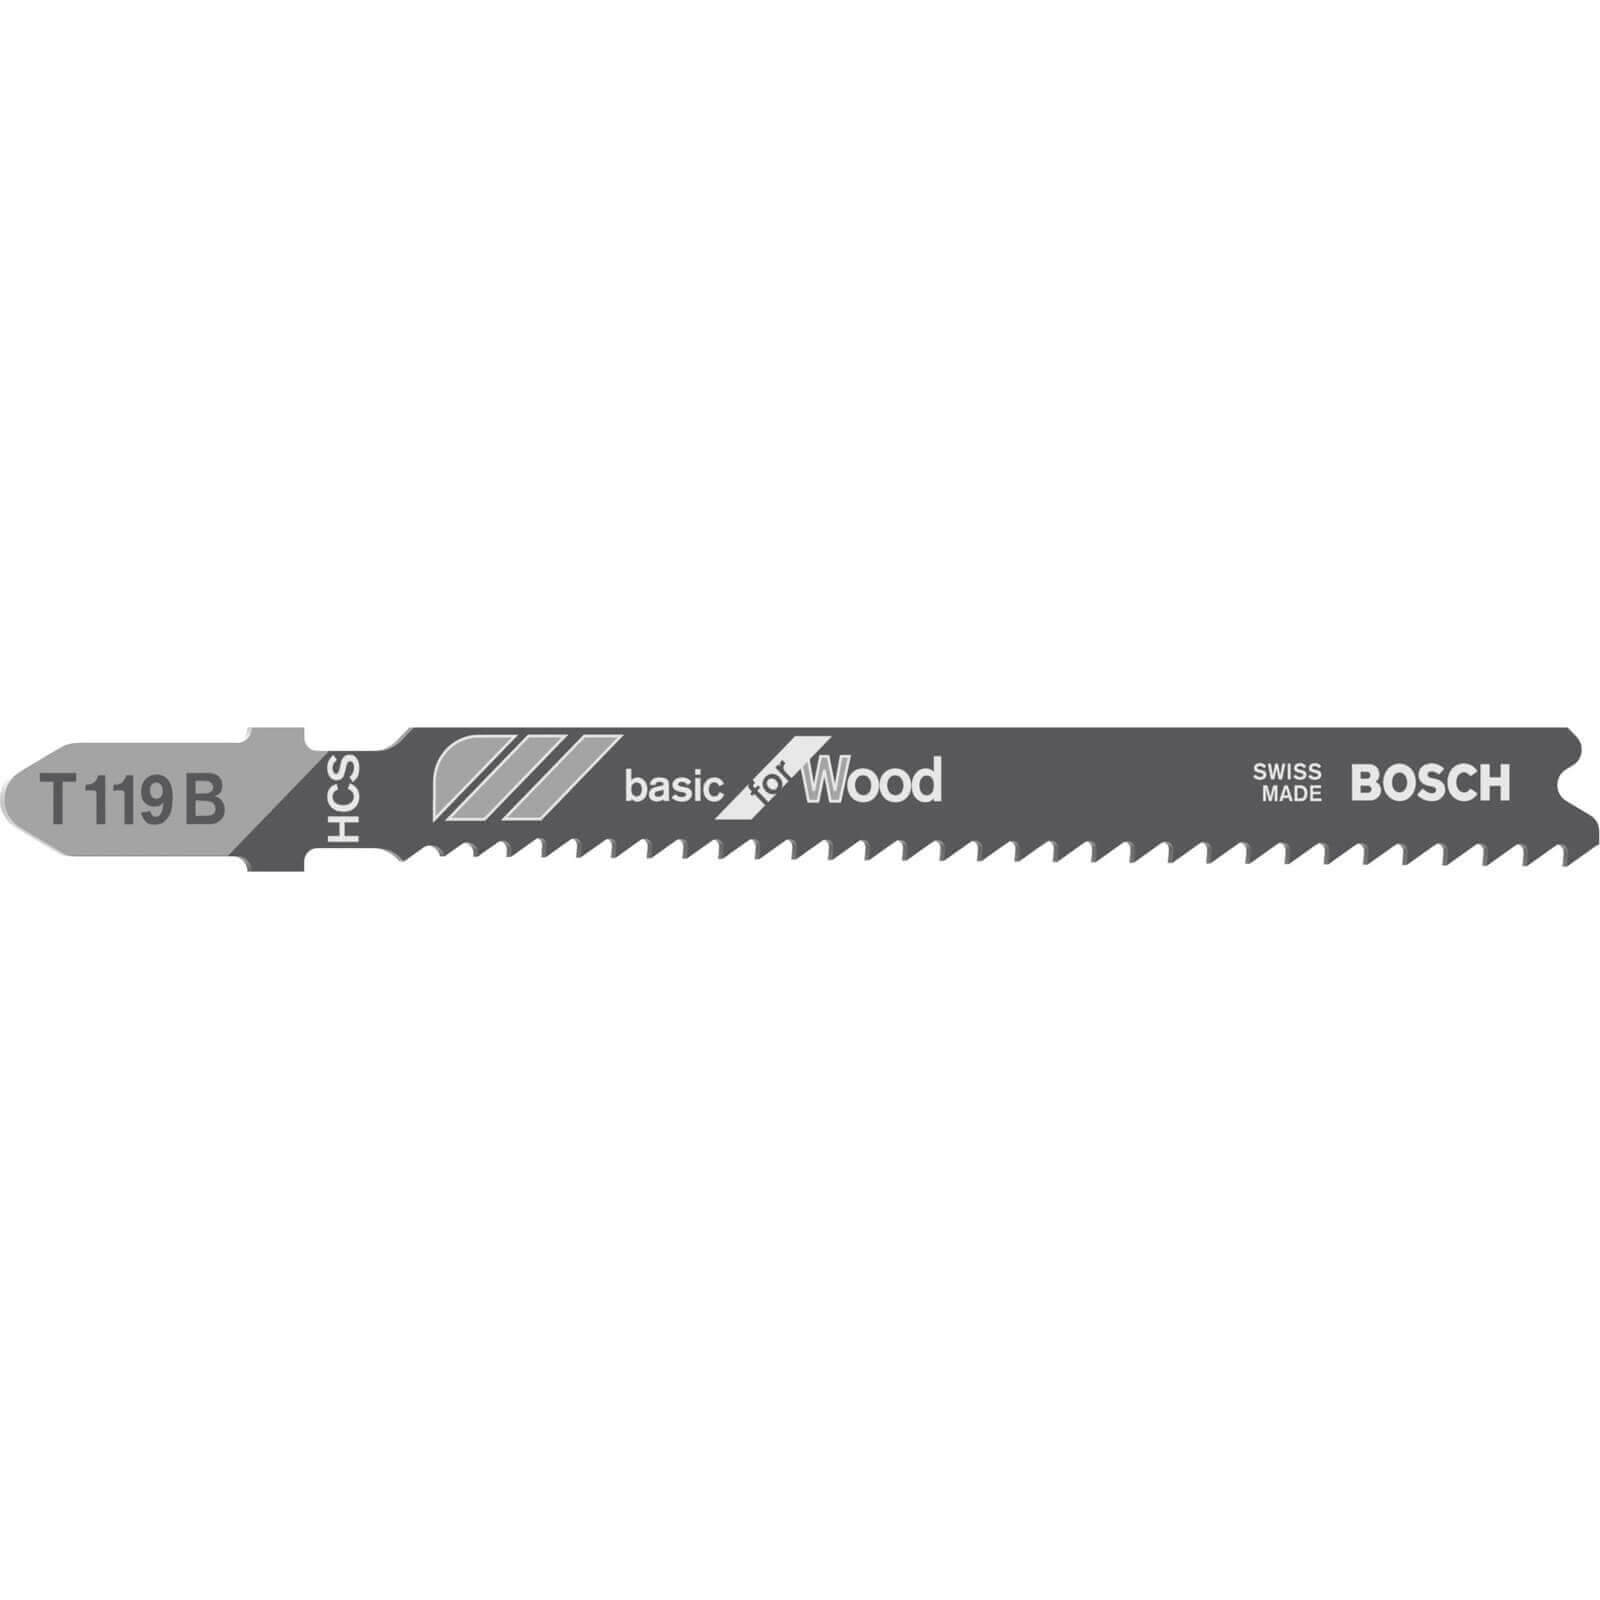 Image of Bosch T119 B Wood Cutting Jigsaw Blades Pack of 5